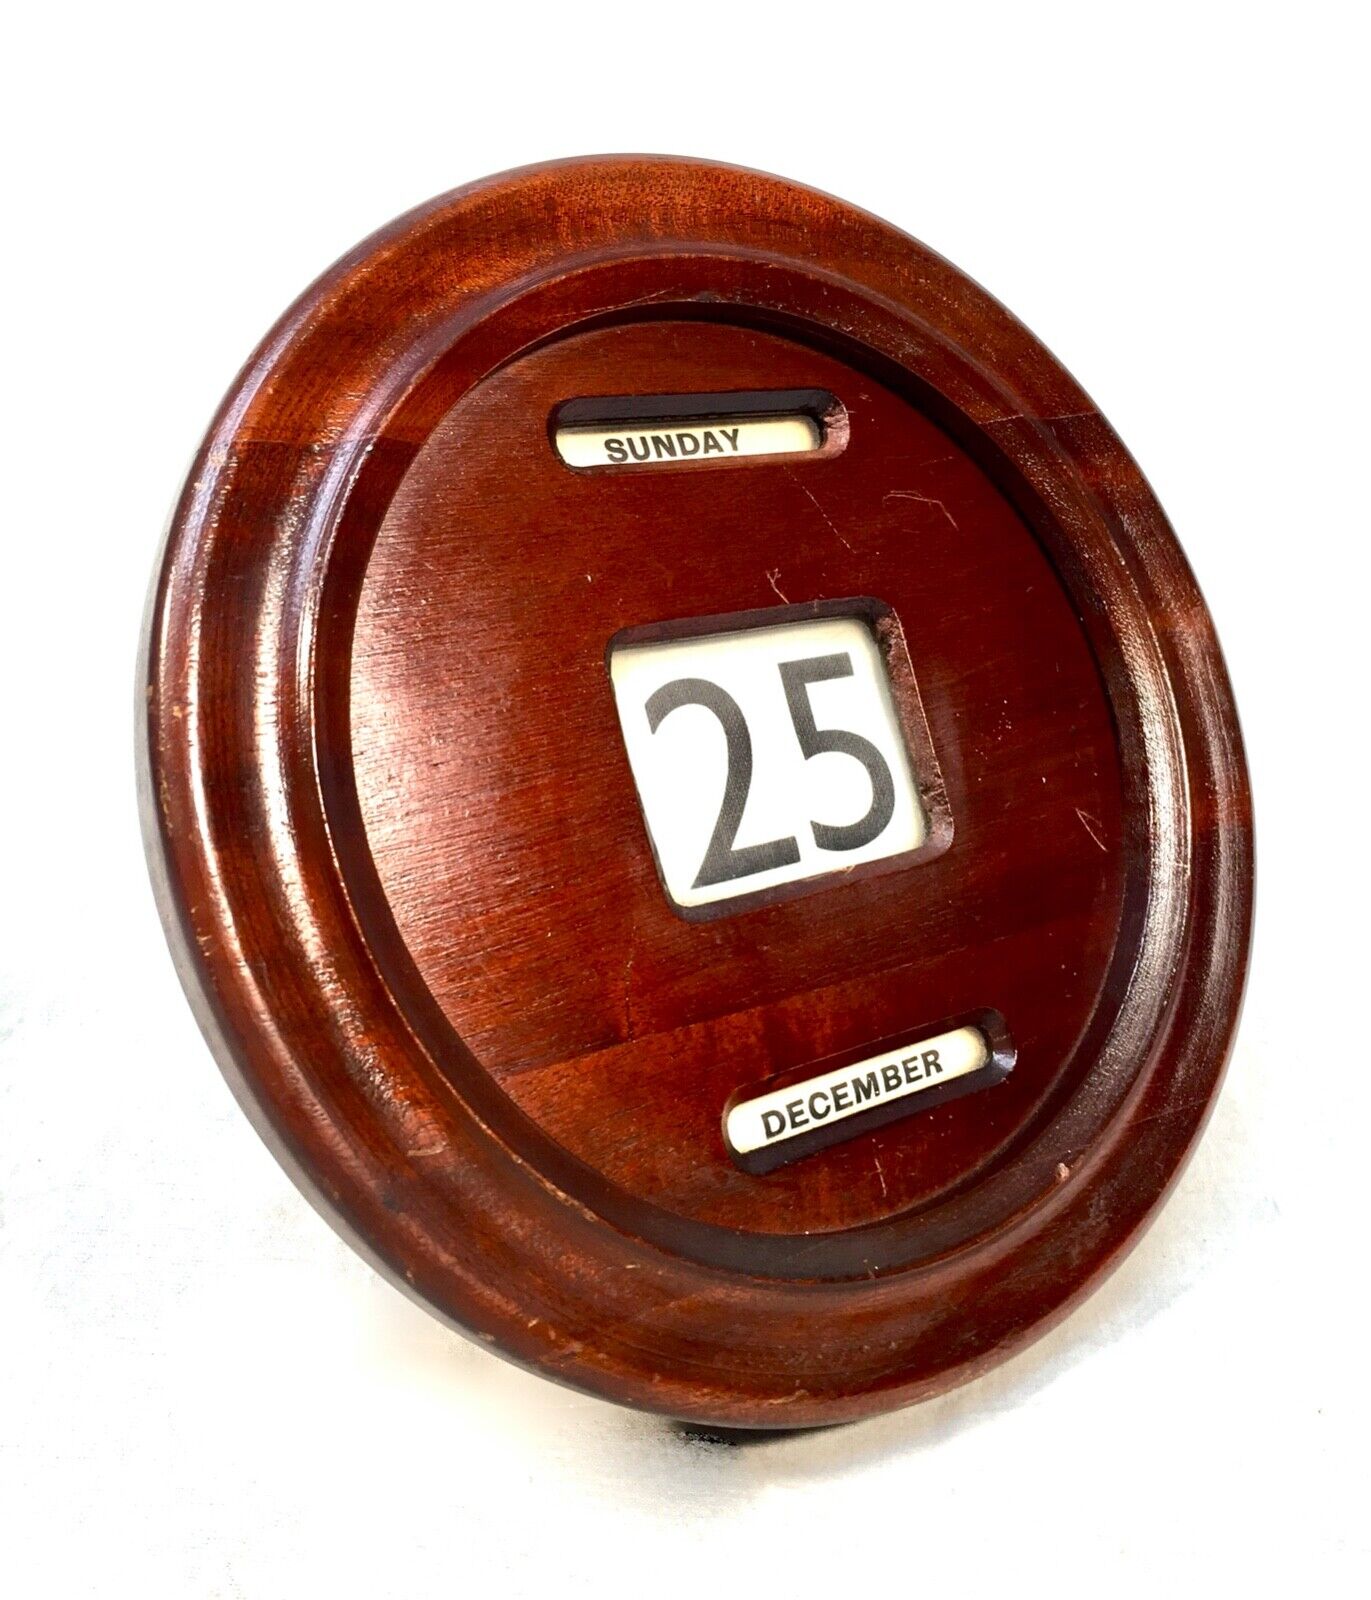 Antique Wooden Art Deco Perpetual Calendar / Wall Hanging / Stationery Equipment